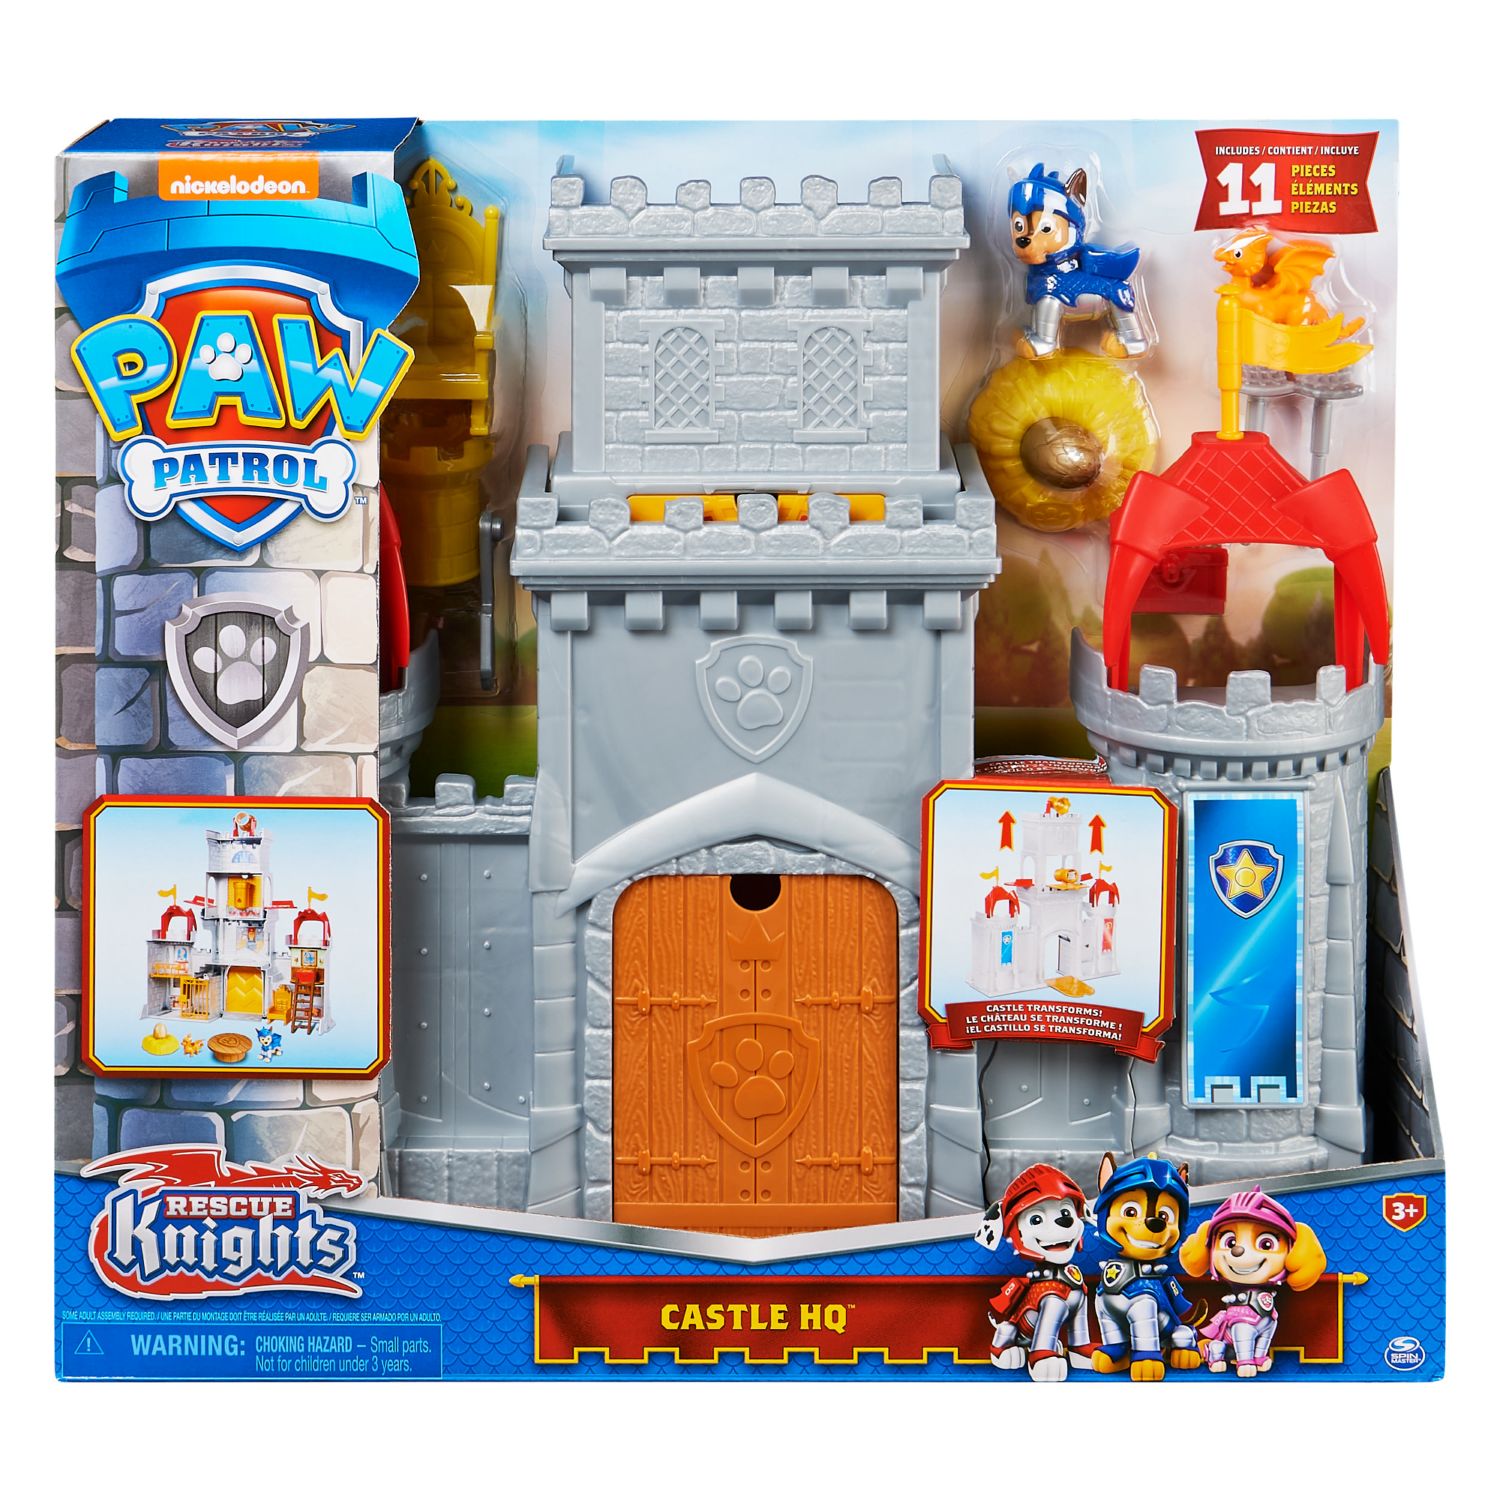 PAW PATROL RESCUE KNIGHTS KNIGHT CASTLE PLAYSET